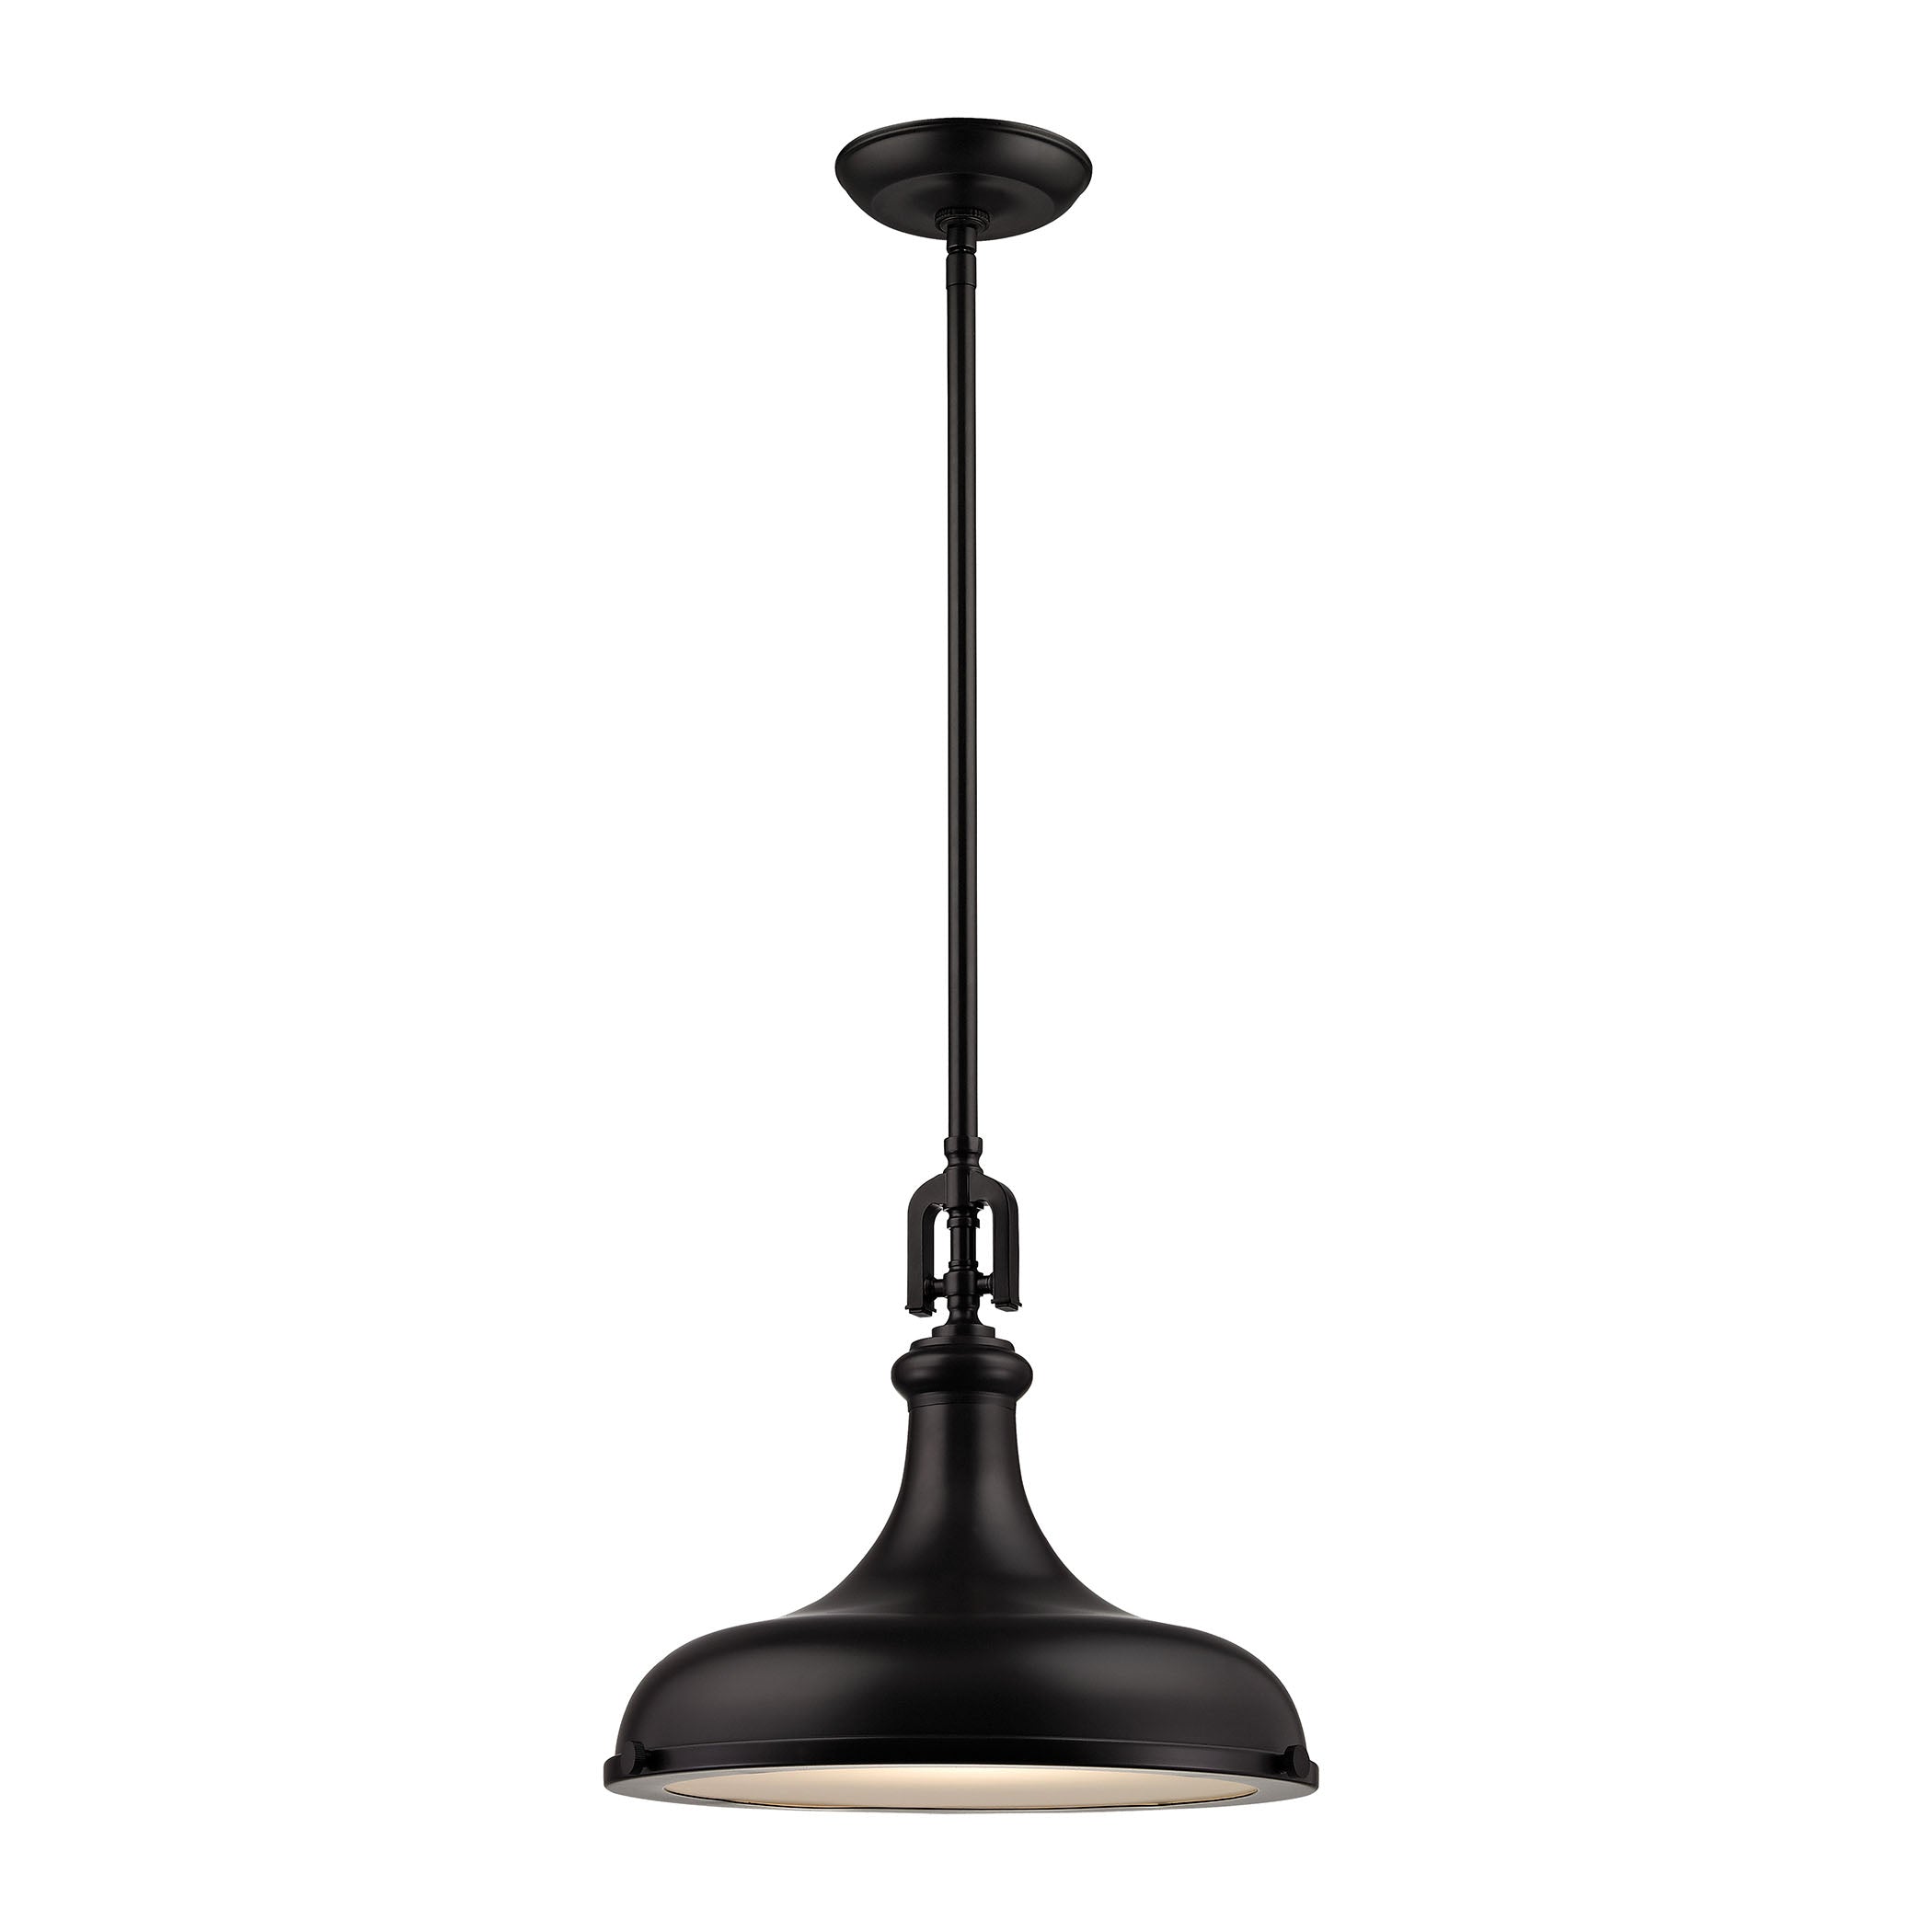 ELK Lighting 57061/1 Rutherford 1-Light Pendant in Oil Rubbed Bronze with Metal Shade